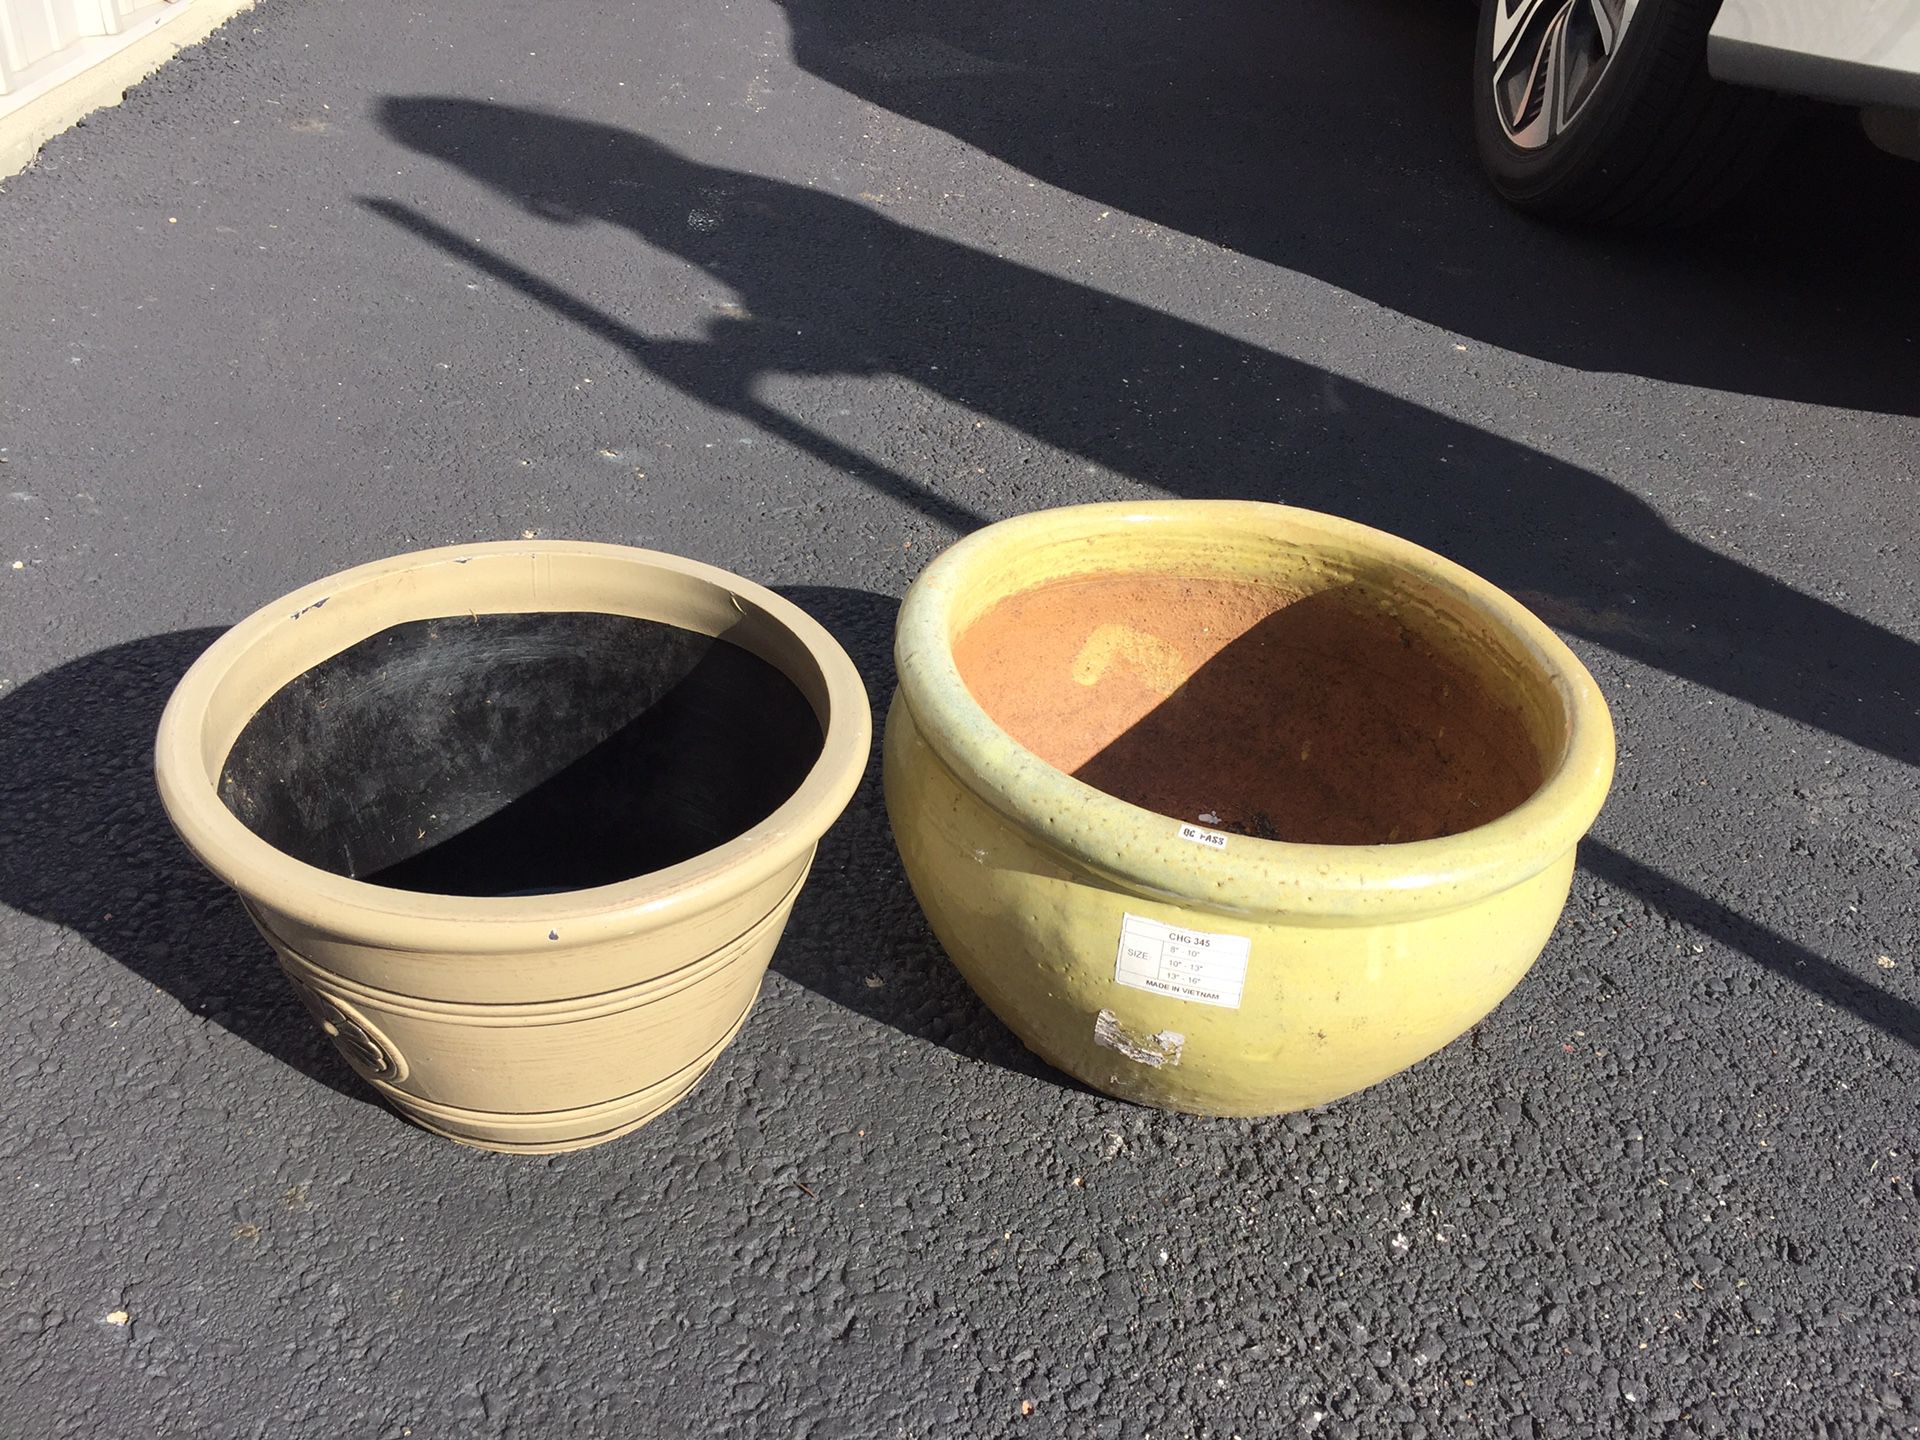 Ceramic flower pots used in good condition. Asking $20 each and negotiable